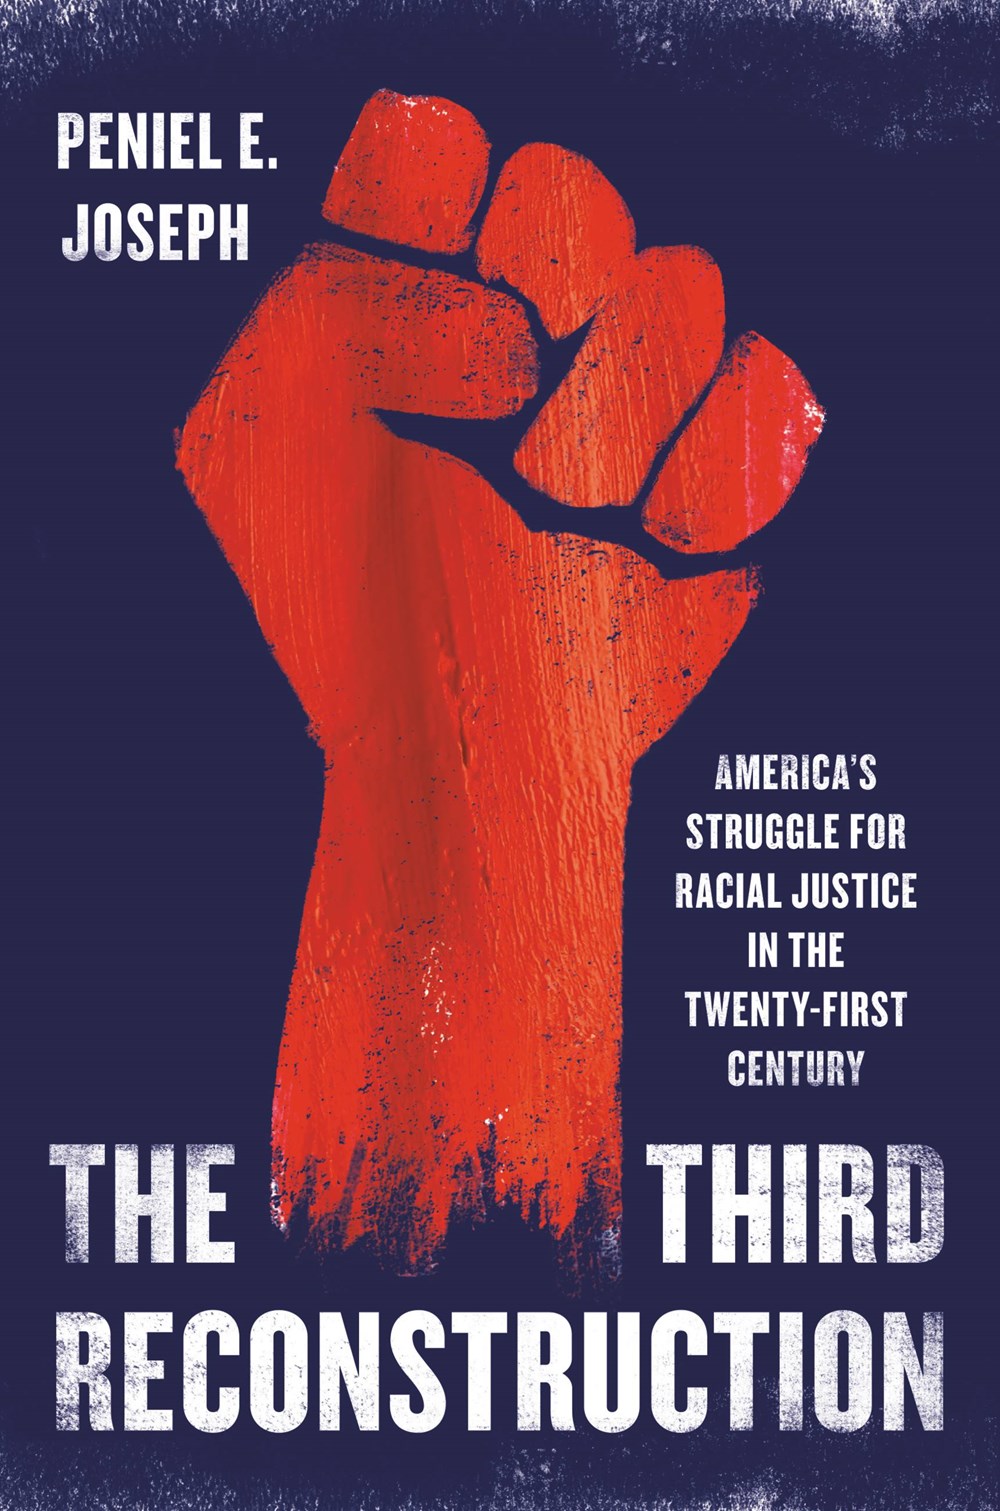 The Third Reconstruction: America's Struggle for Racial Justice in the Twenty-First Century by Peniel E. Joseph